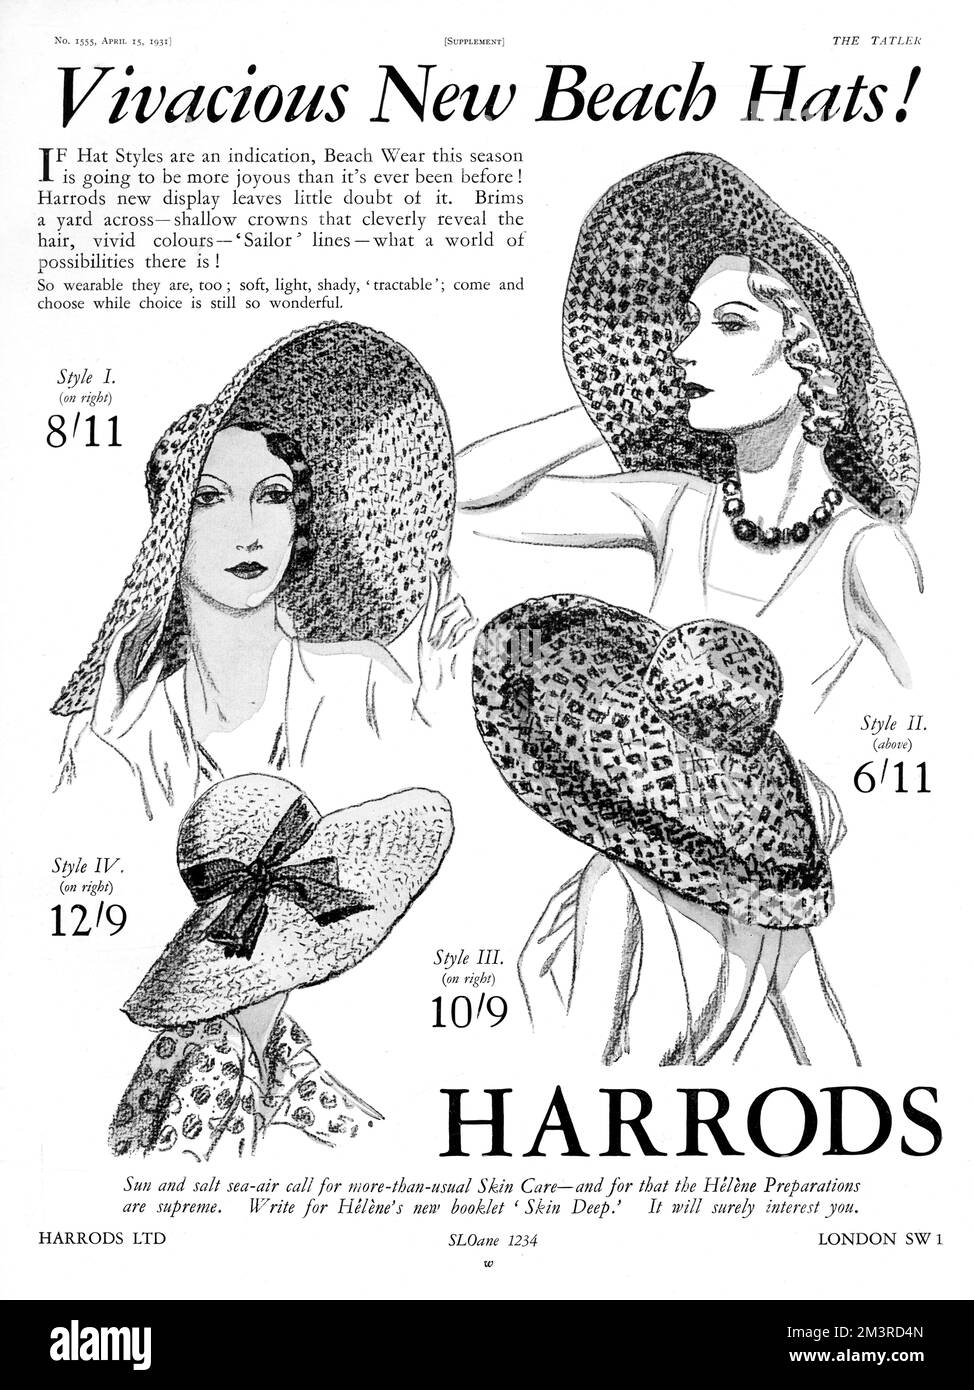 Advertisement for wide-brimmed beach hats from Harrods.  Brims are a yard across and the shallow crowns 'cleverly reveal hair'.     Date: 1931 Stock Photo